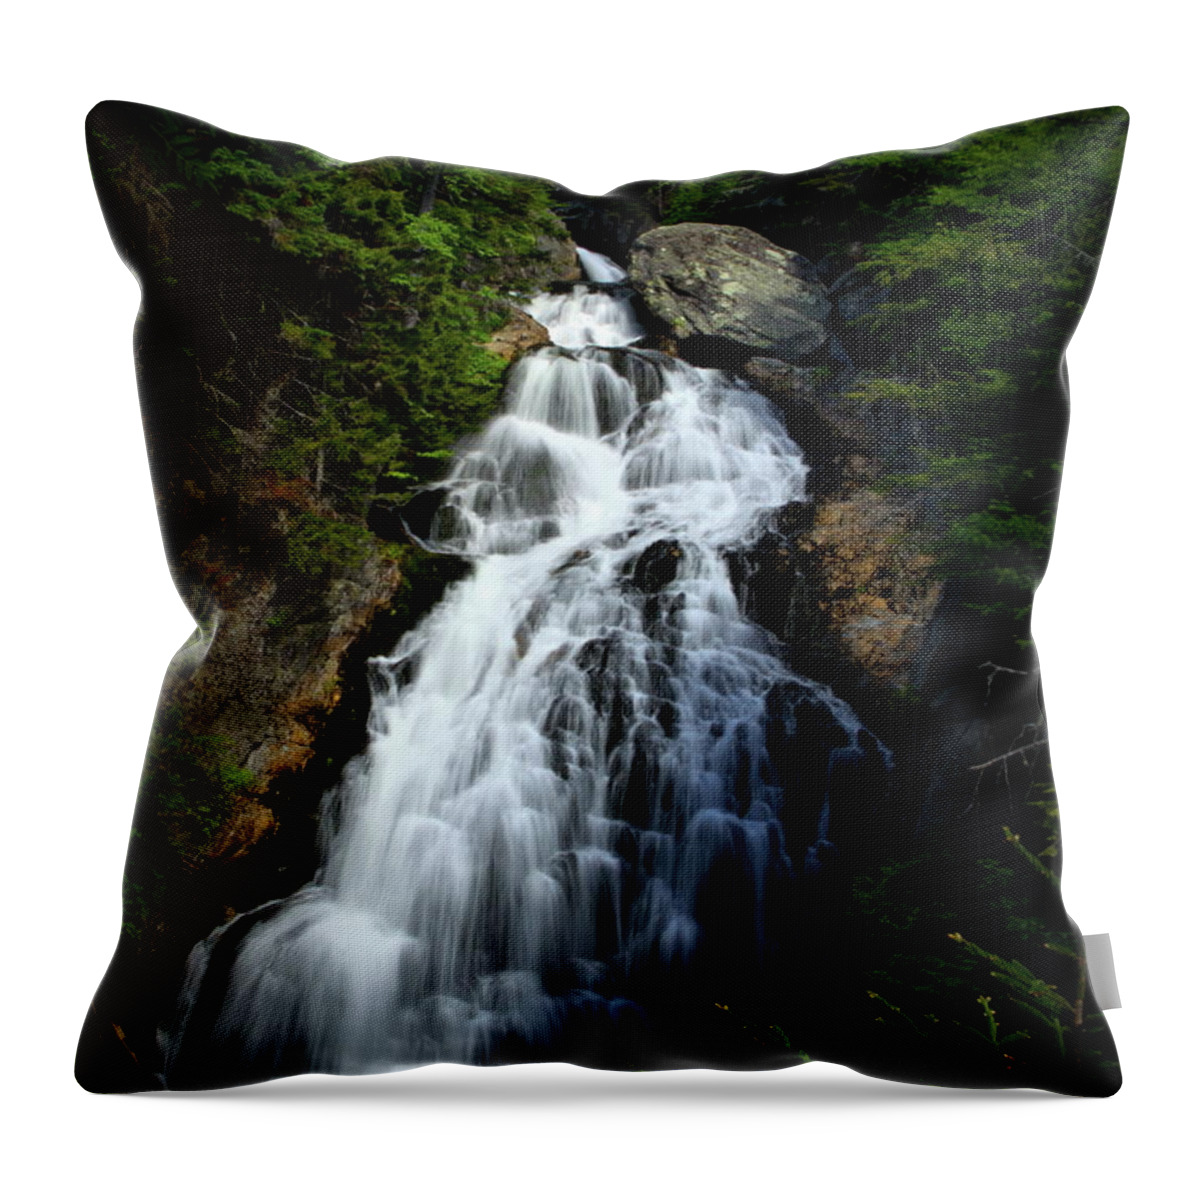 Waterfall Throw Pillow featuring the photograph Summer Starts by Harry Moulton